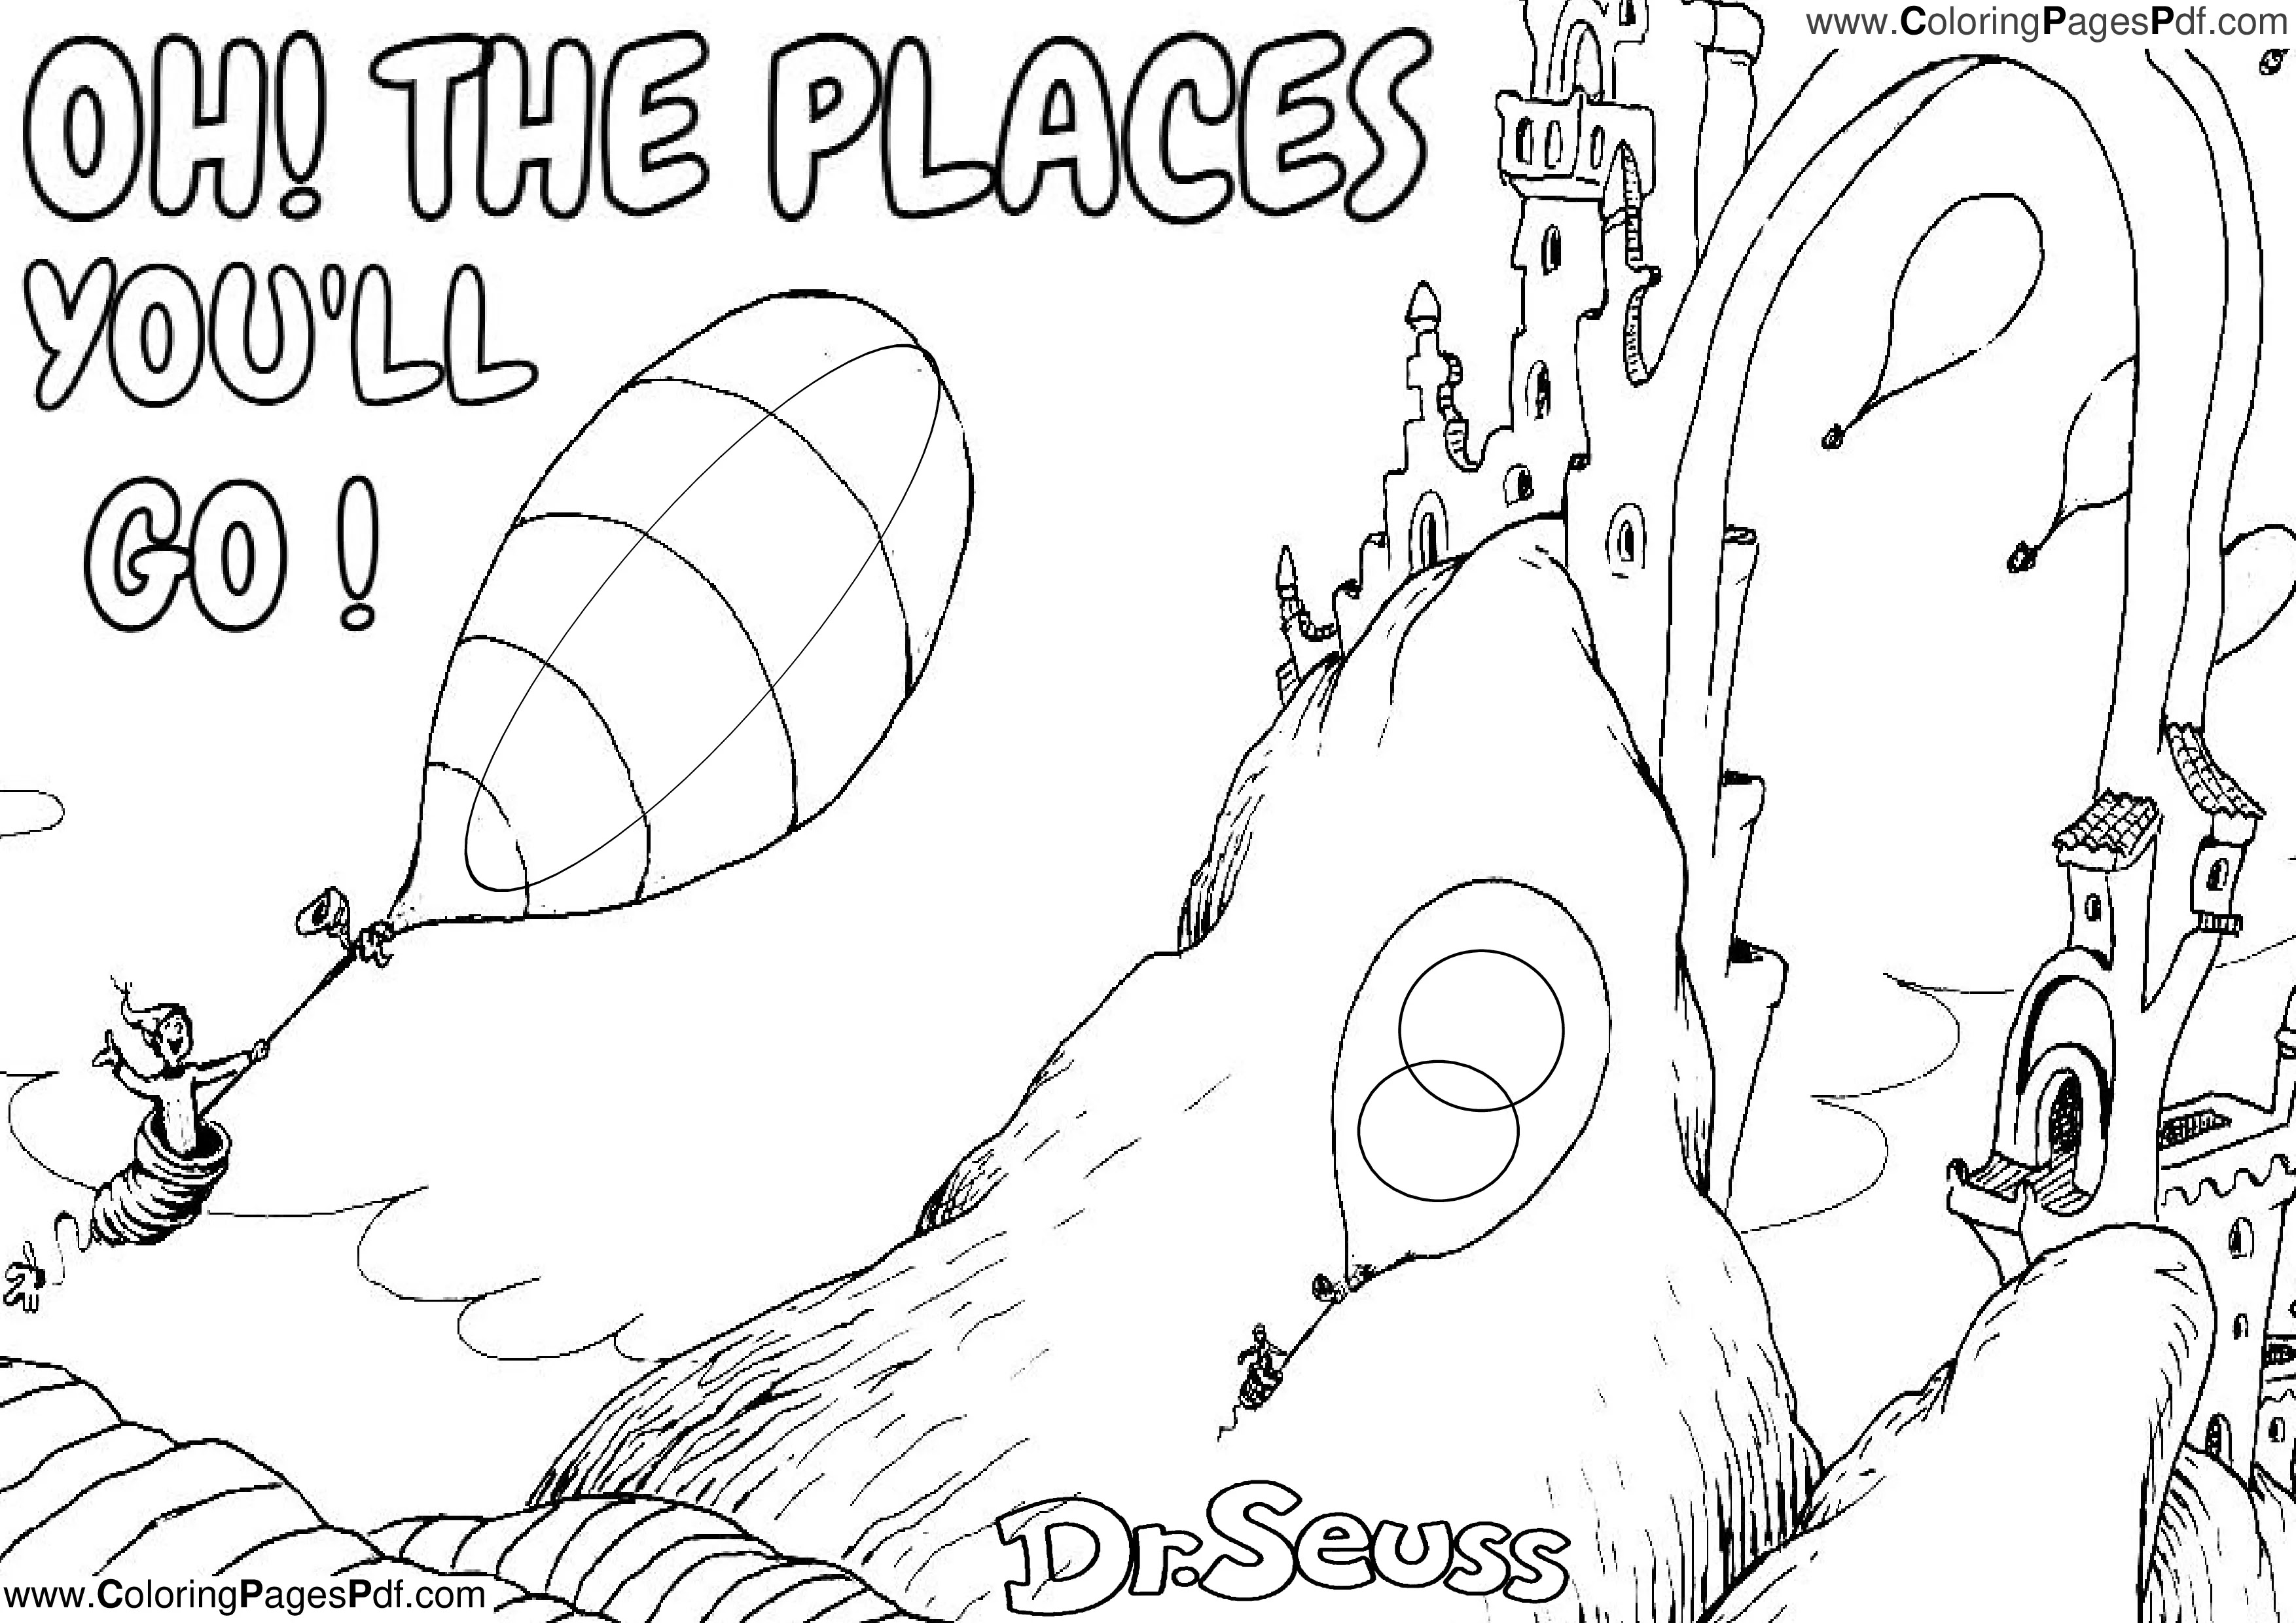 Dr. seuss coloring pages oh the places you'll go